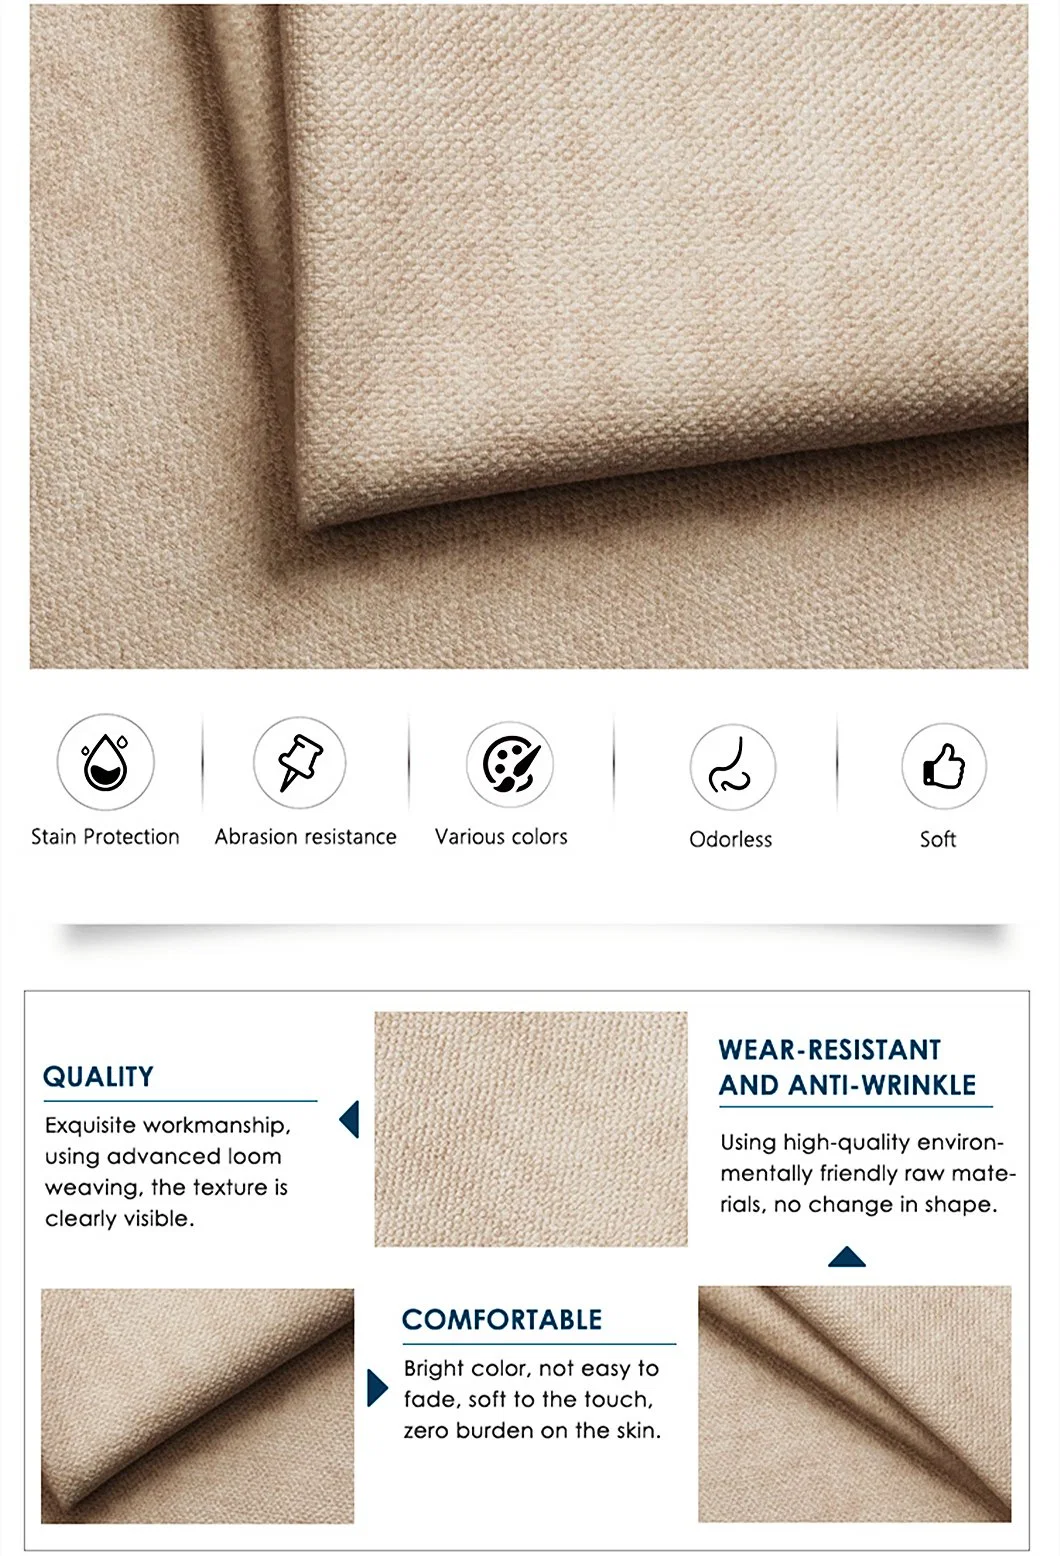 Hot Sales 100% Polyester Wide Width 300cm Linen Like Blackout Roller Fabric